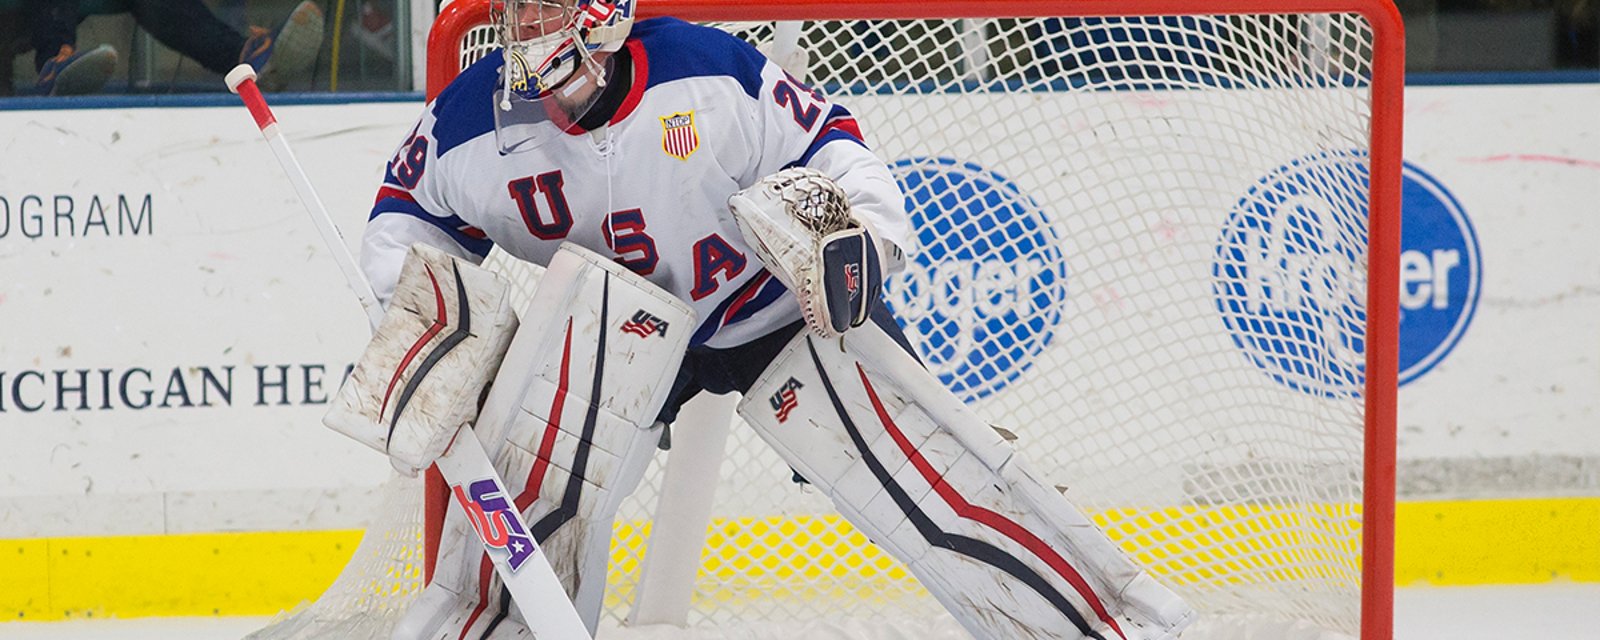 Breaking: Leafs prospect Woll named to USA